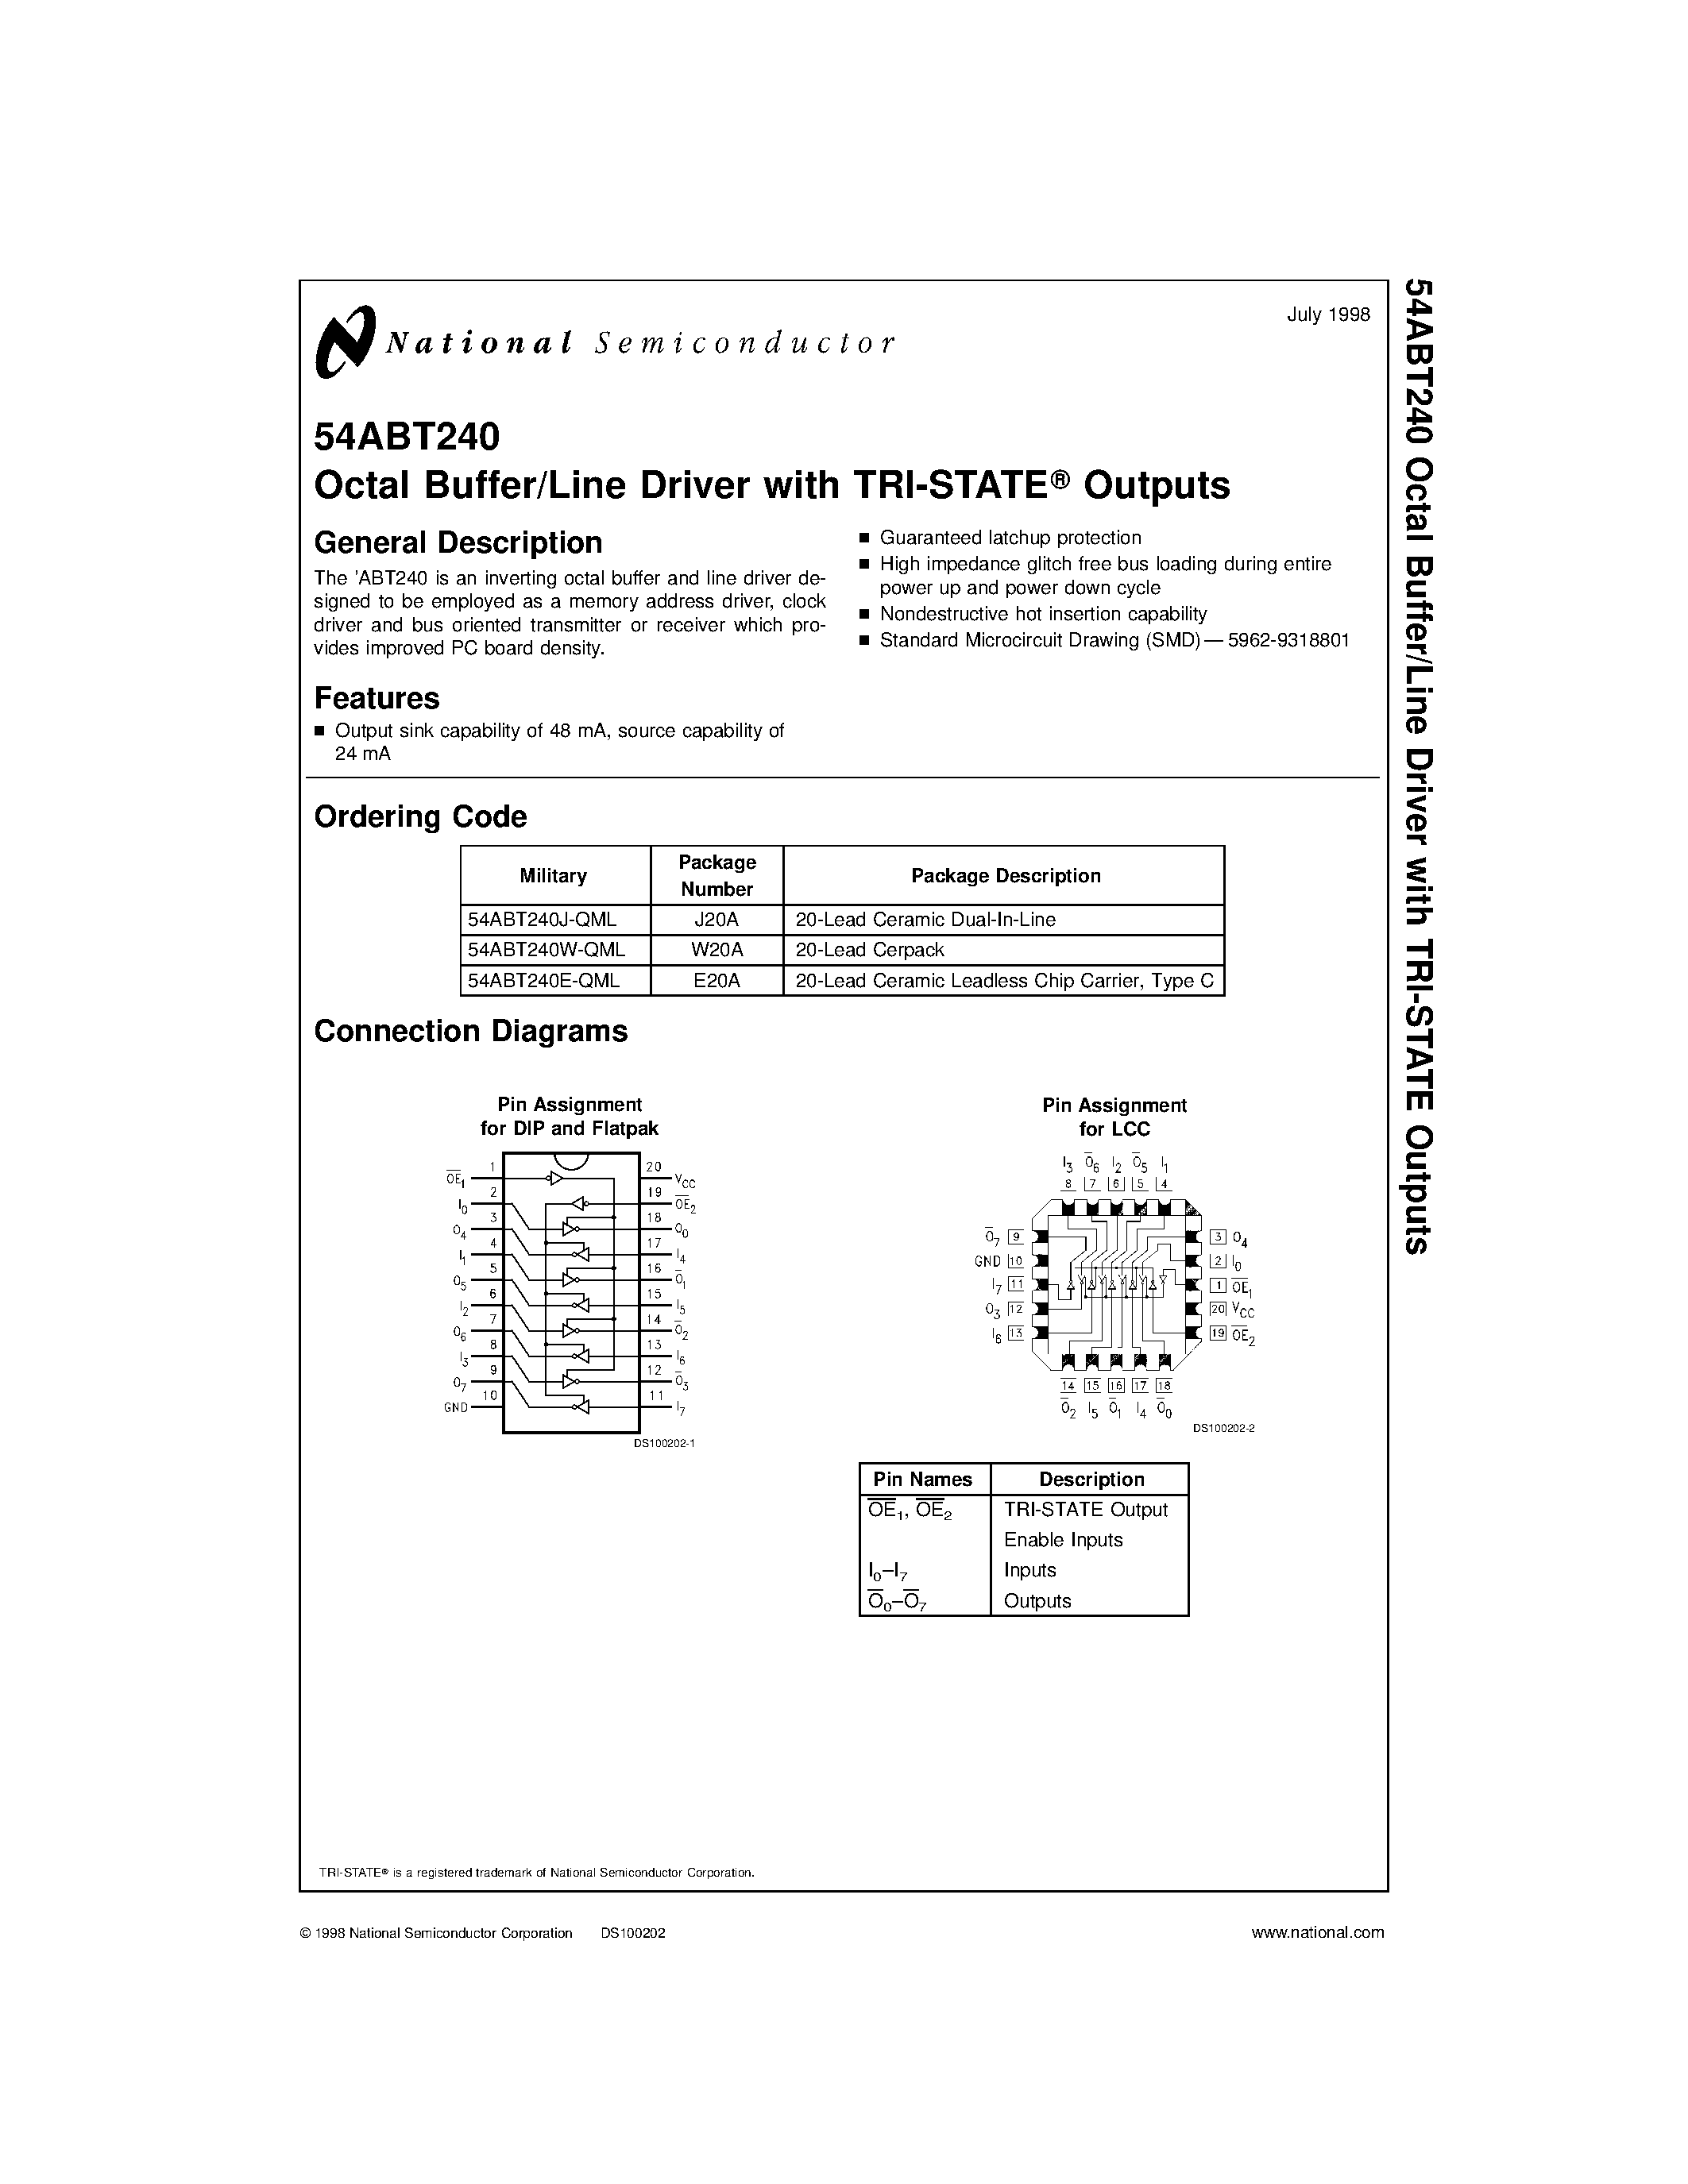 Datasheet 54ABT240 - Octal Buffer/Line Driver with TRI-STATE Outputs page 1